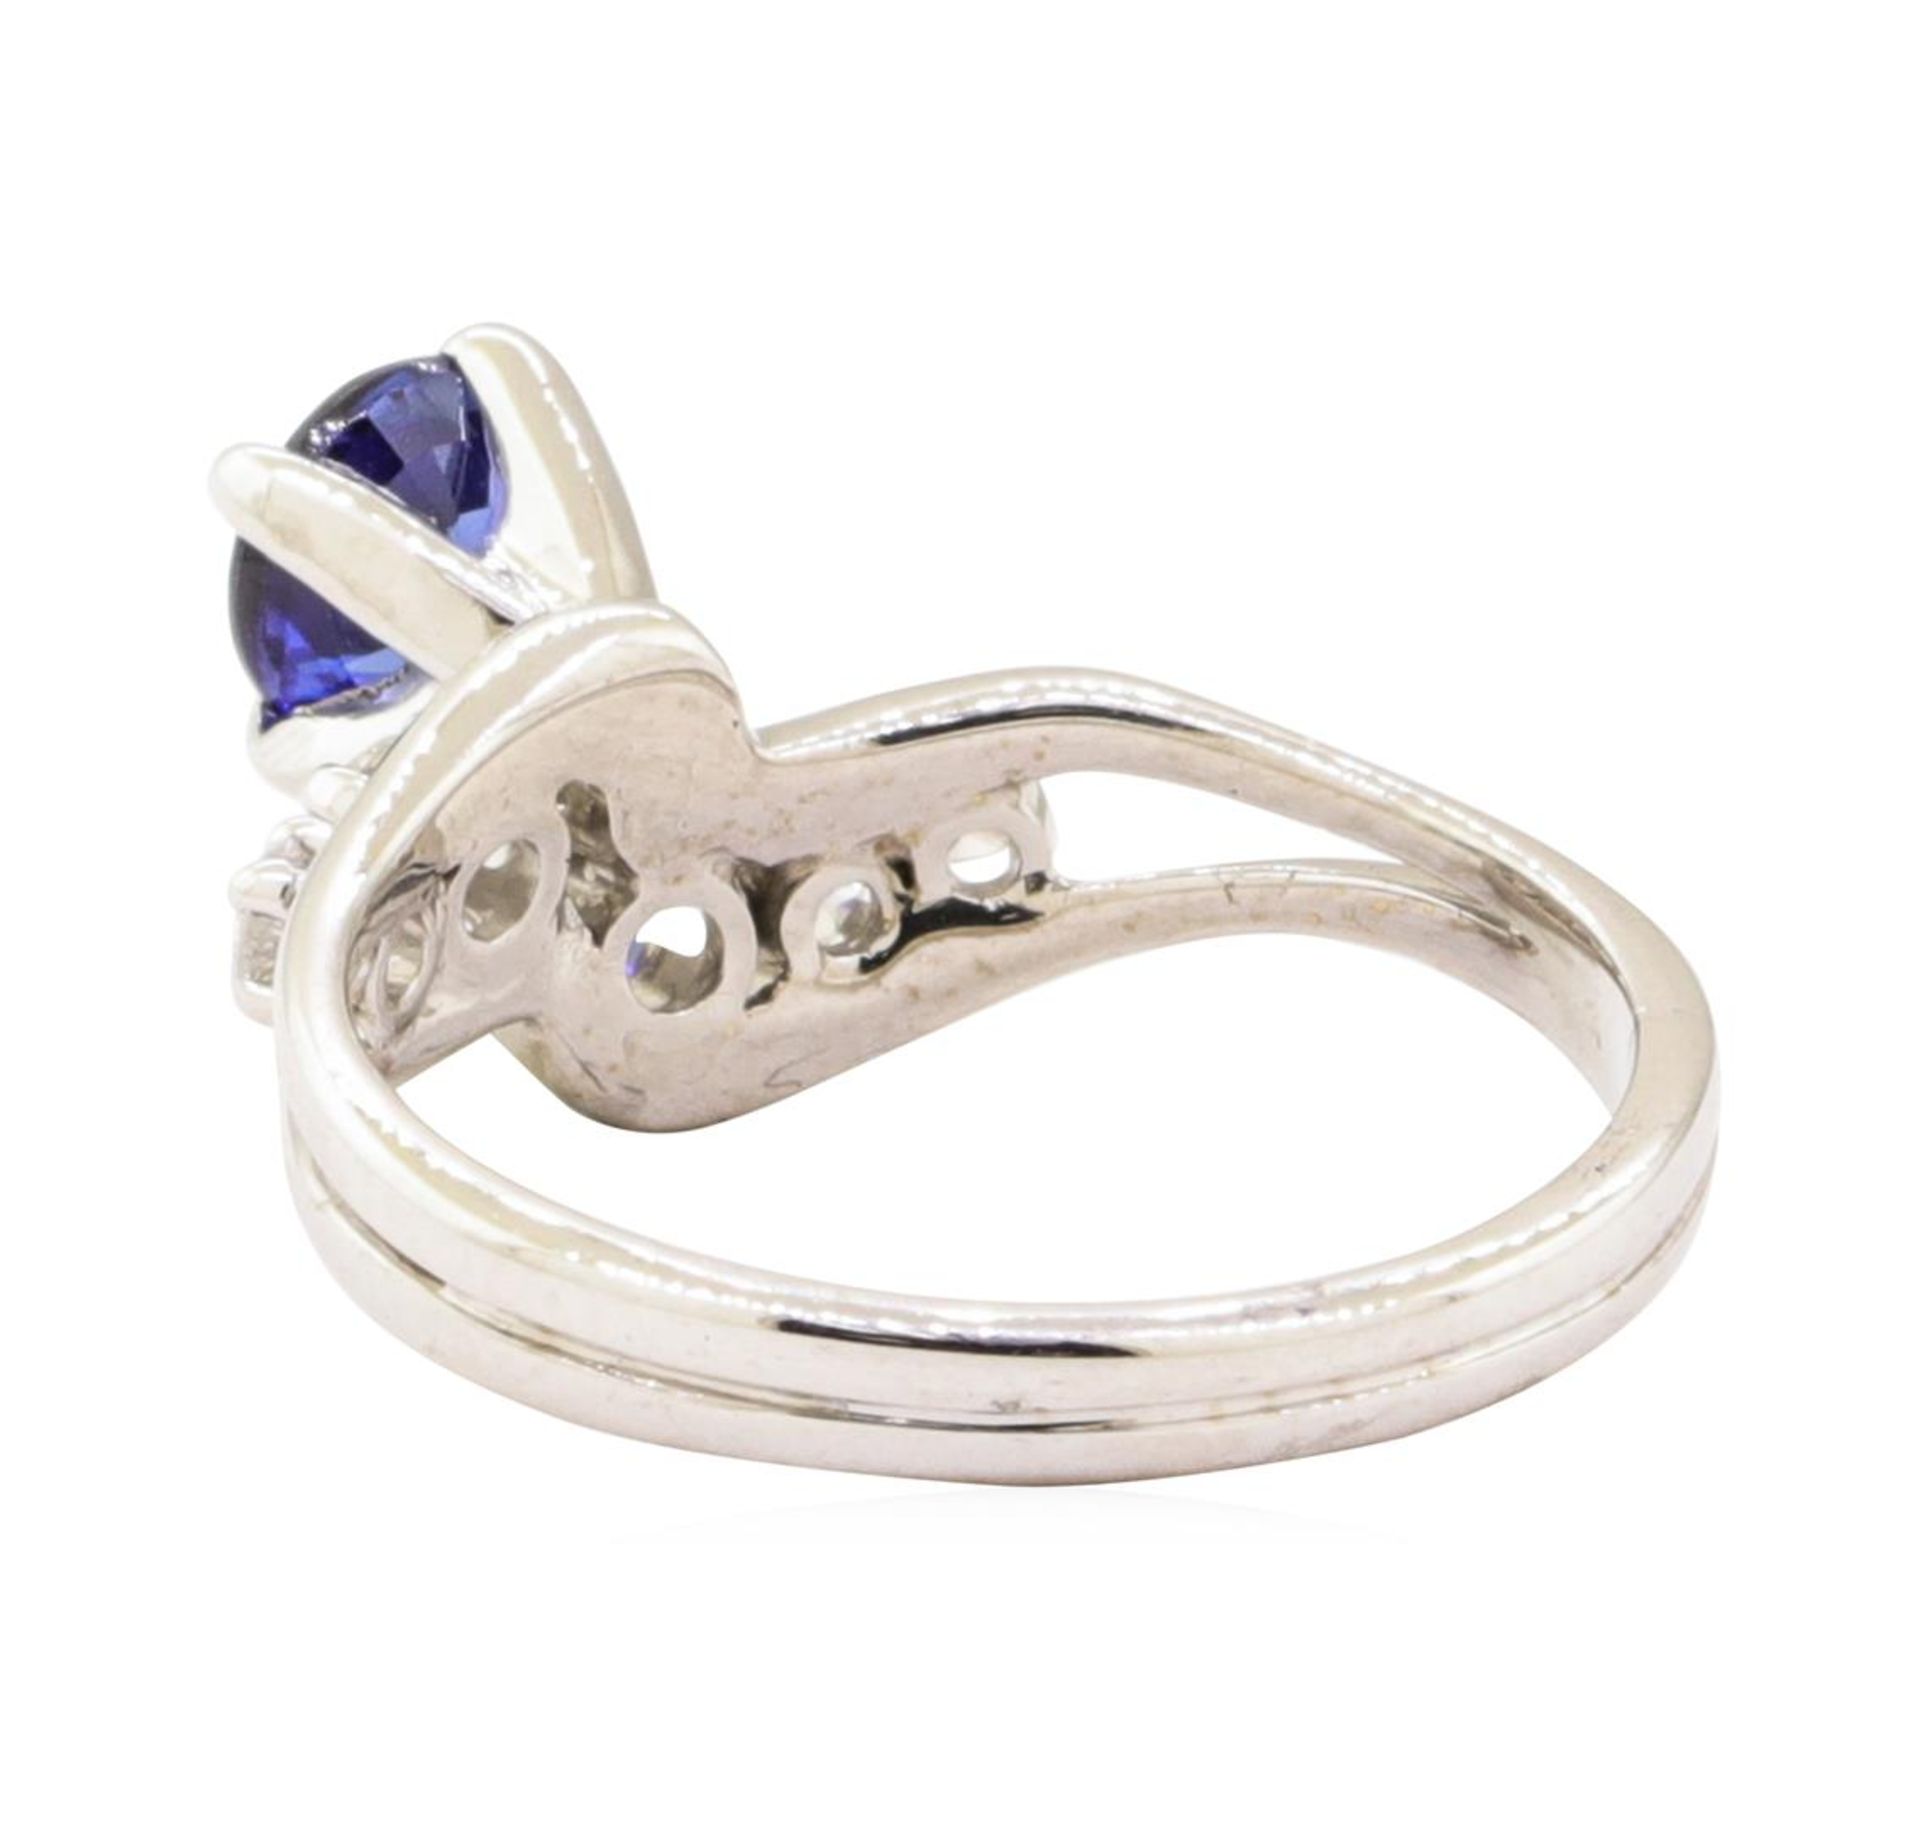 0.92ctw Blue Sapphire and Diamond Ring - 14KT White Gold - Image 3 of 4